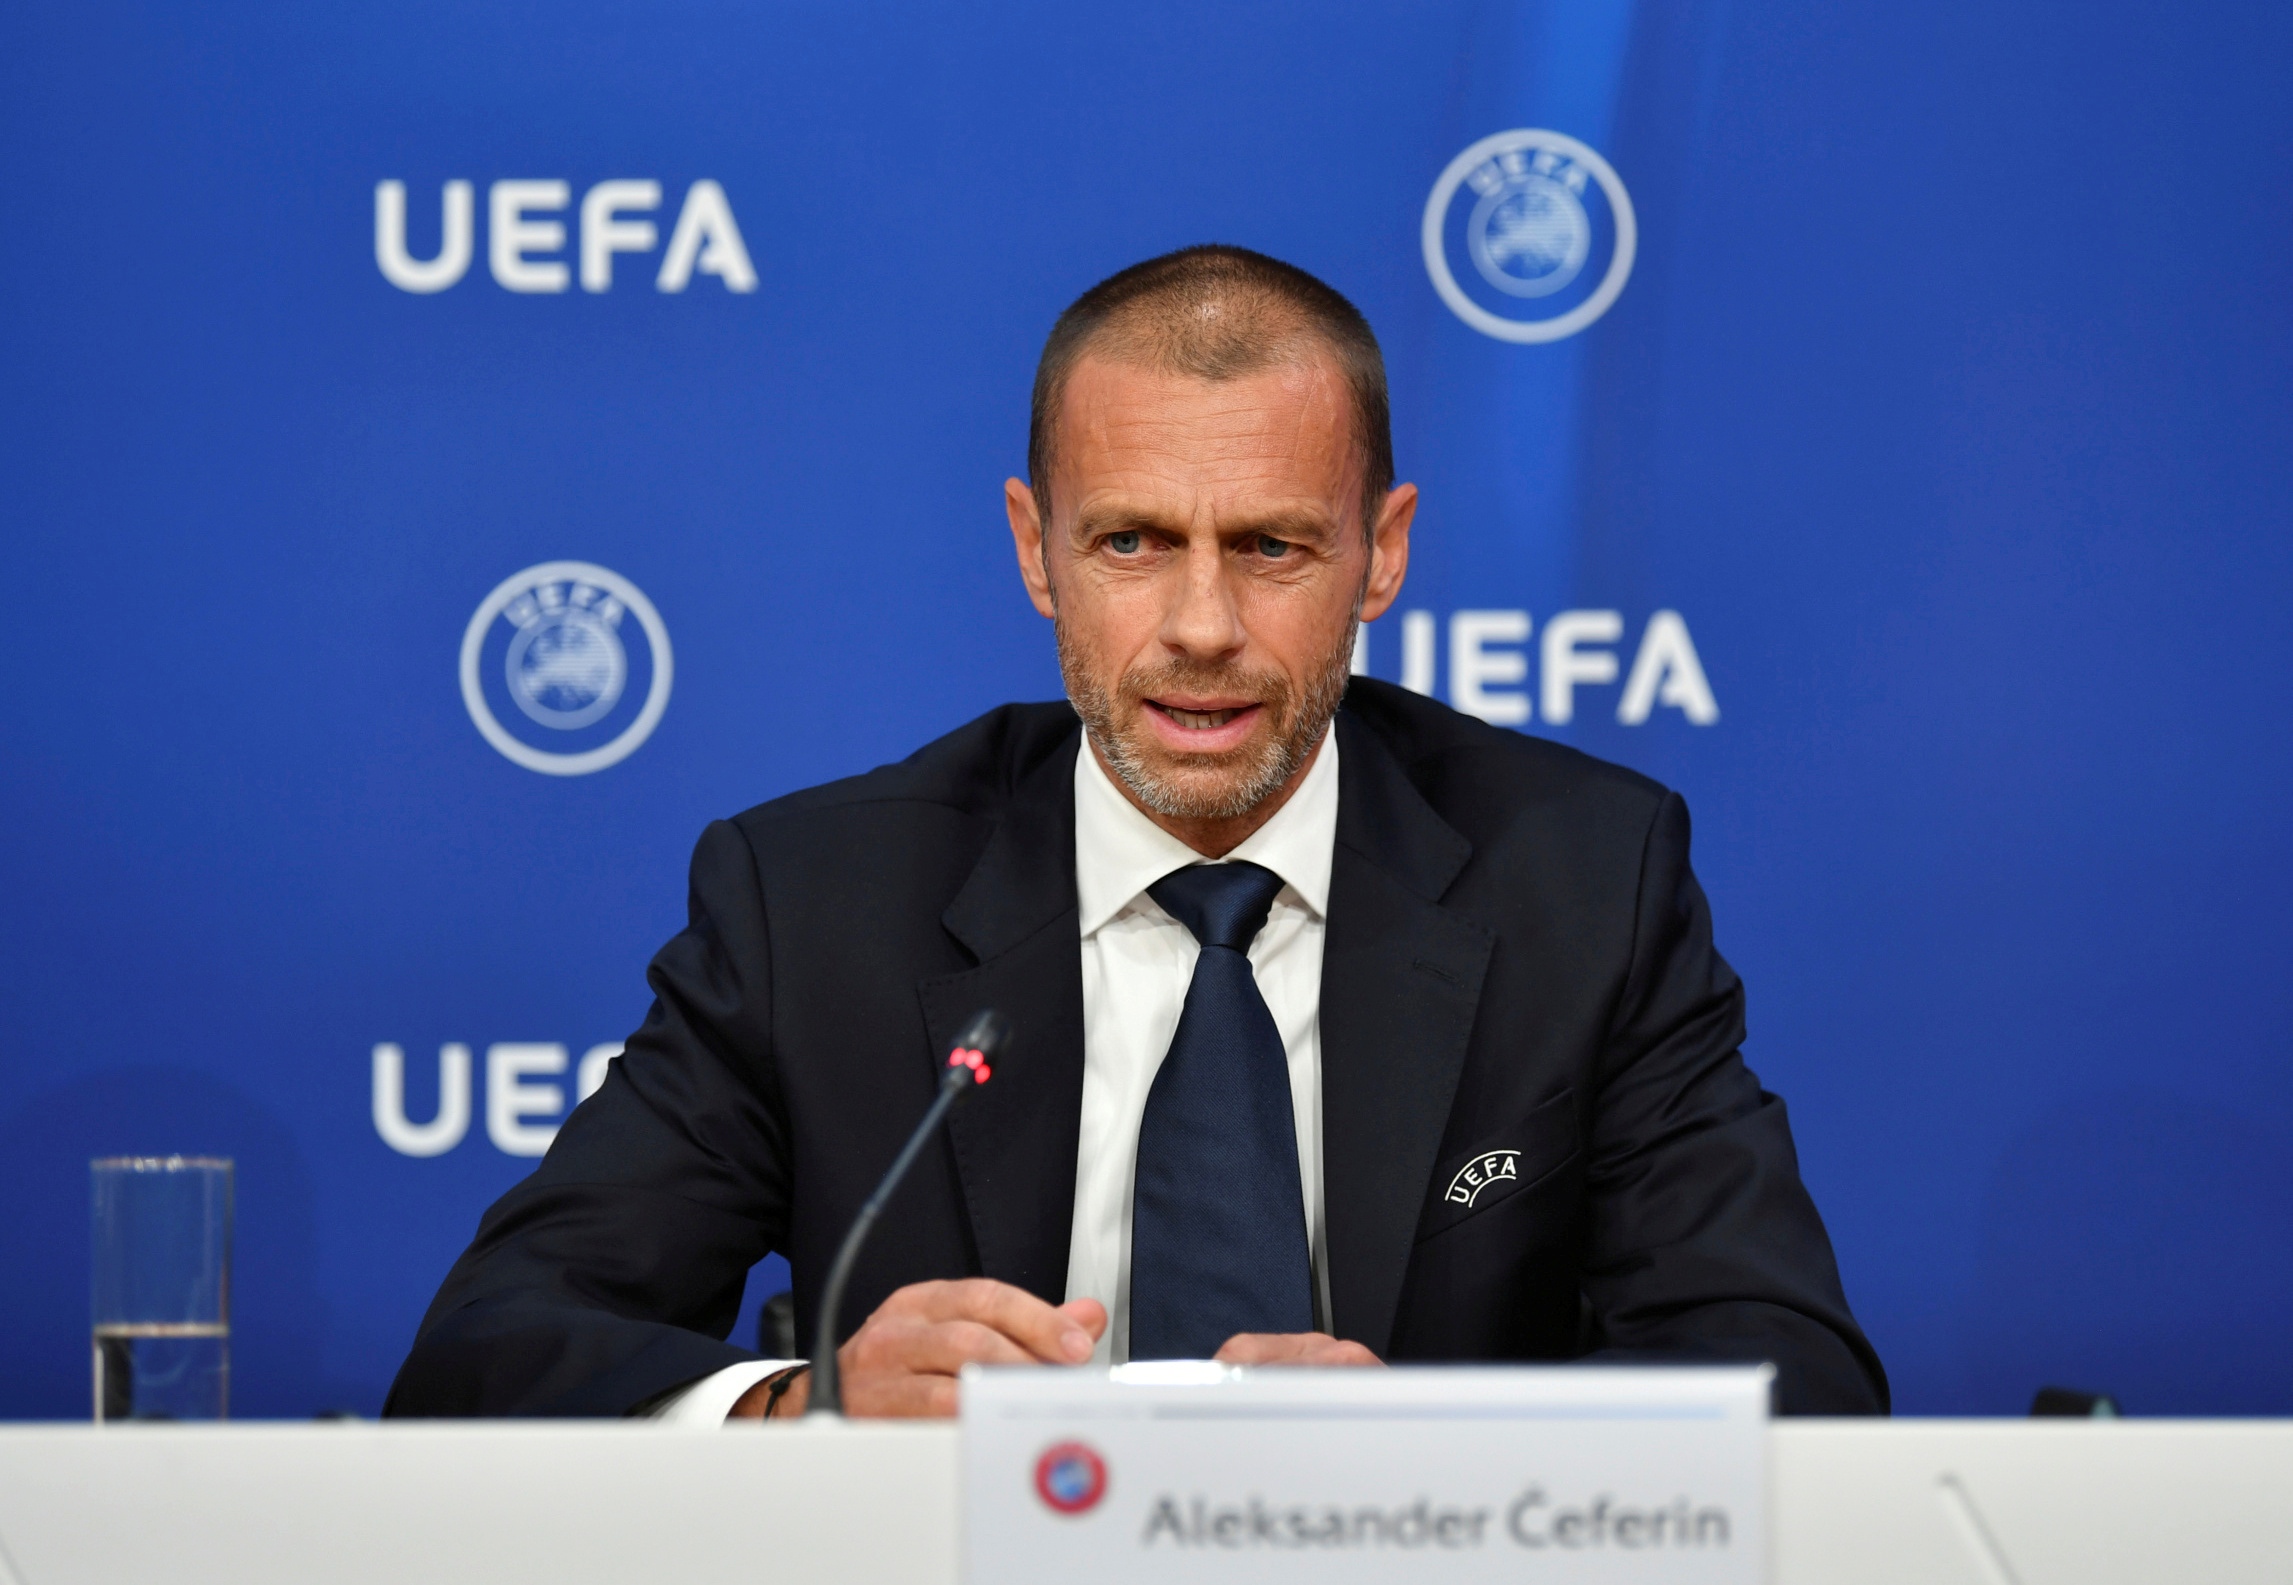 UEFA Executive Committee Press Conference Soccer Football - UEFA Executive Committee Press Conference - Nyon, Switzerland - June 17, 2020 UEFA president Aleksander Ceferin during a press conference following the UEFA Executive Committee meeting at the UEFA headquarters  UEFA Pool/Handout via REUTERS ATTENTION EDITORS - THIS IMAGE HAS BEEN SUPPLIED BY A THIRD PARTY.  NO RESALES. NO ARCHIVES REFILE - ADDING RESTRICTIONS HANDOUT